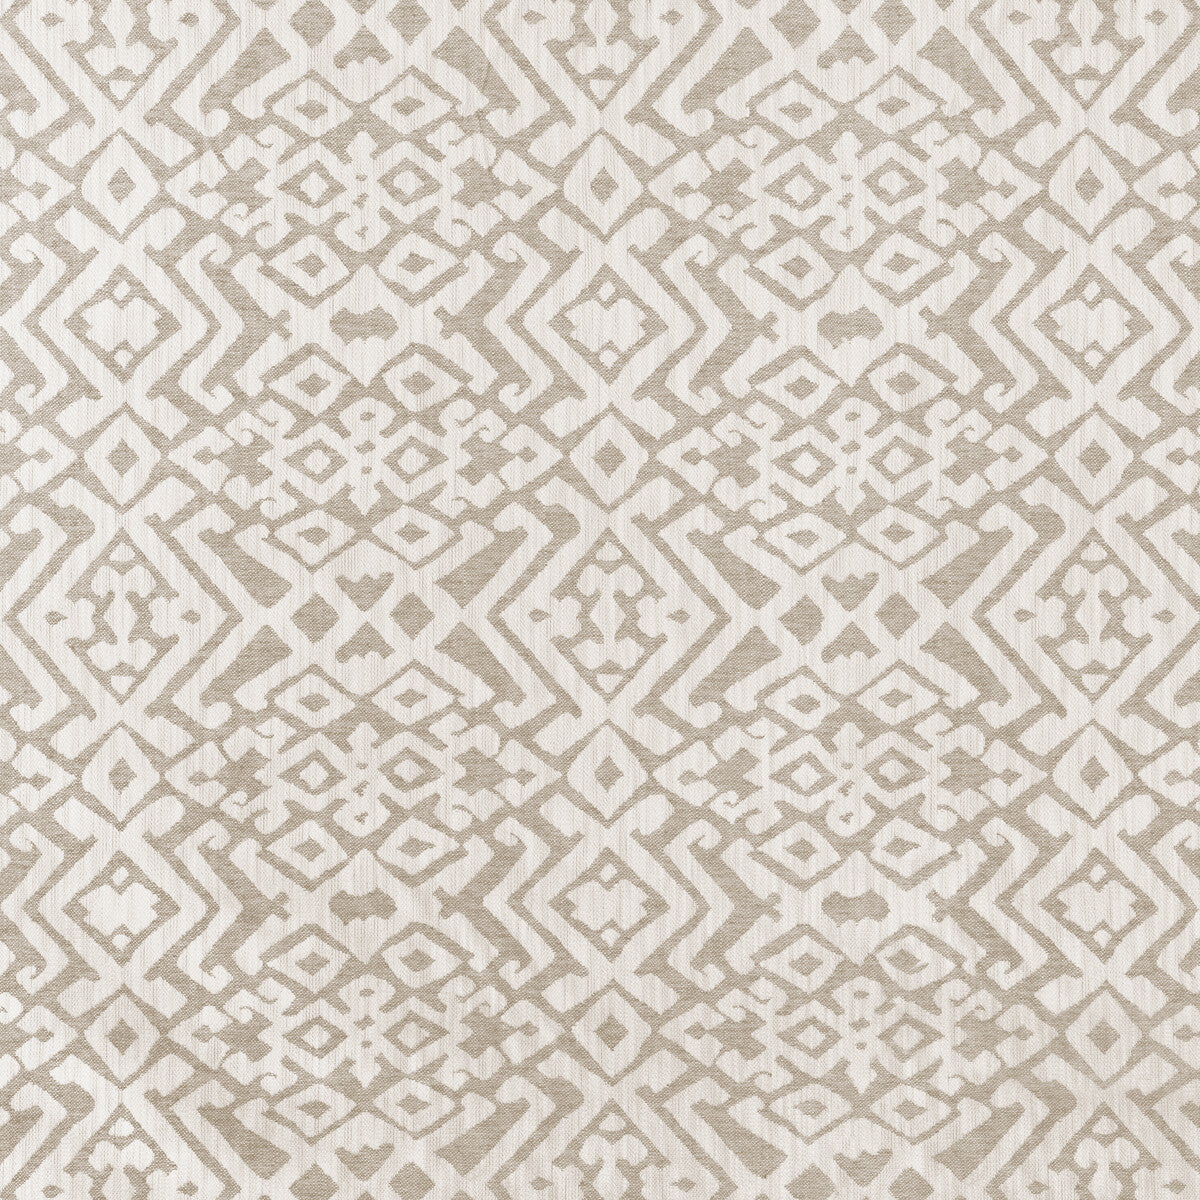 Springbok fabric in stone color - pattern 36874.106.0 - by Kravet Couture in the Atelier Weaves collection